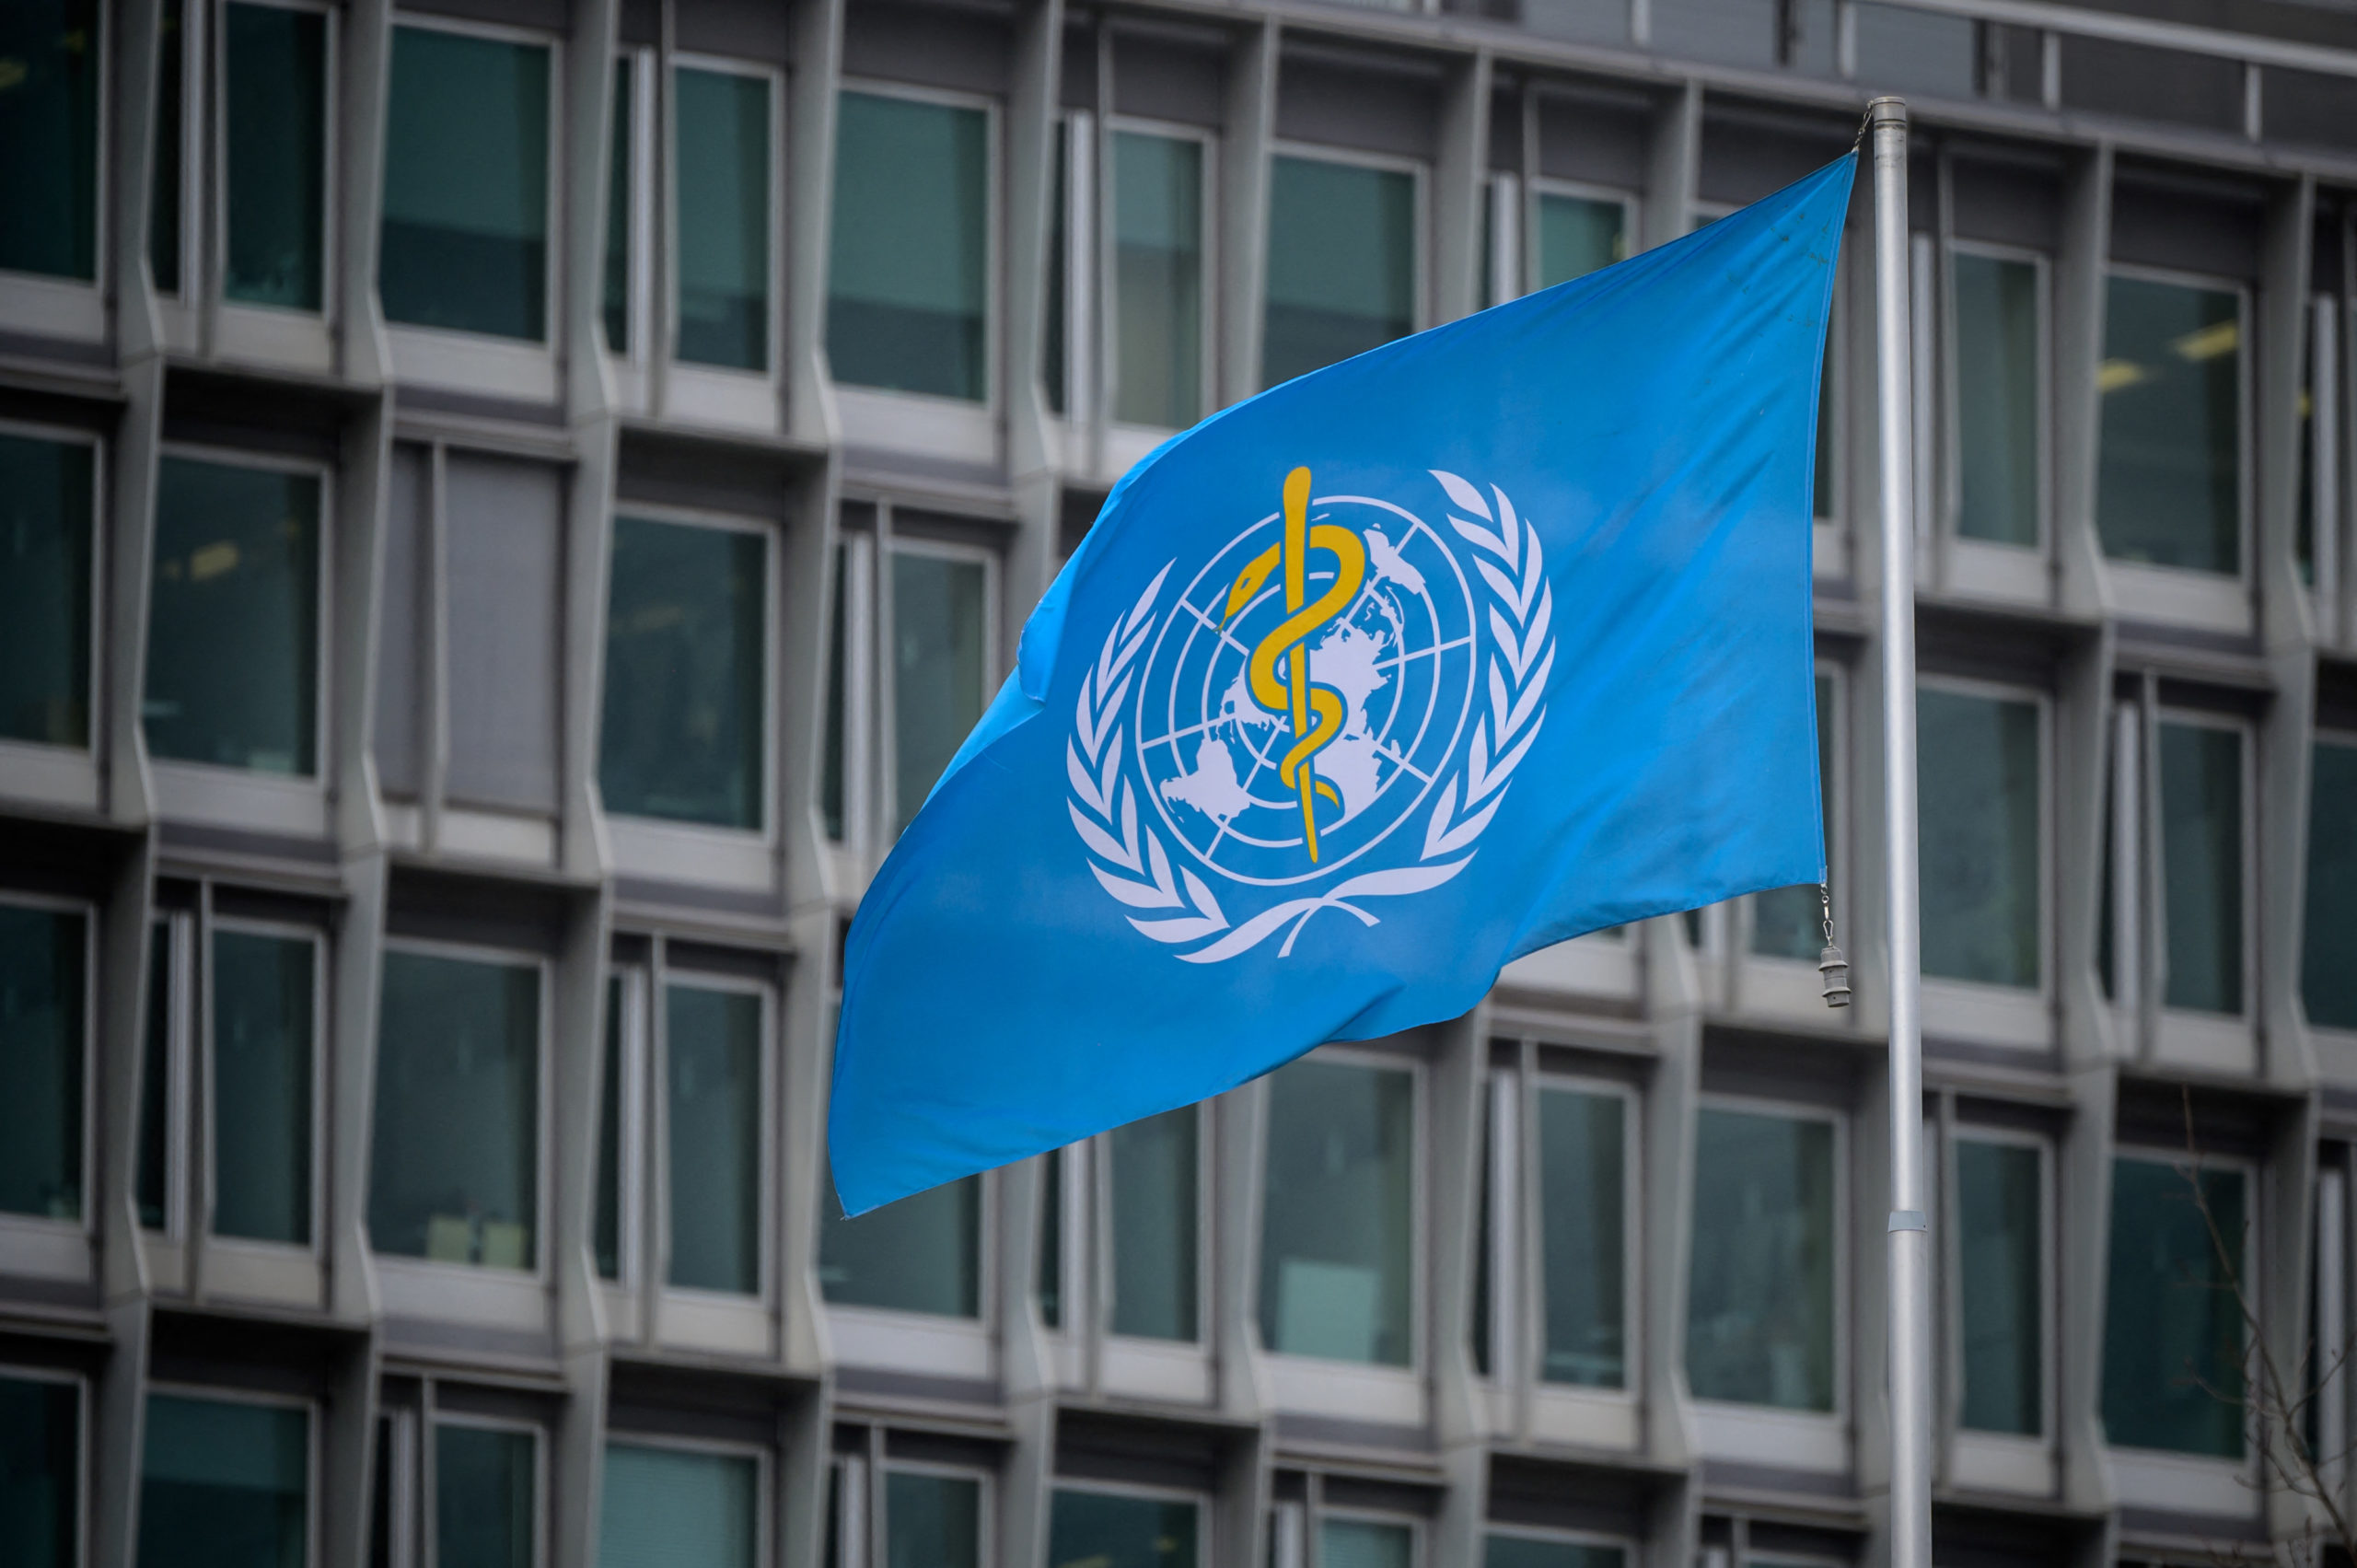 The flag of the World Health Organization (WHO) at their headquarters in Geneva. (Photo by FABRICE COFFRINI/AFP via Getty Images)